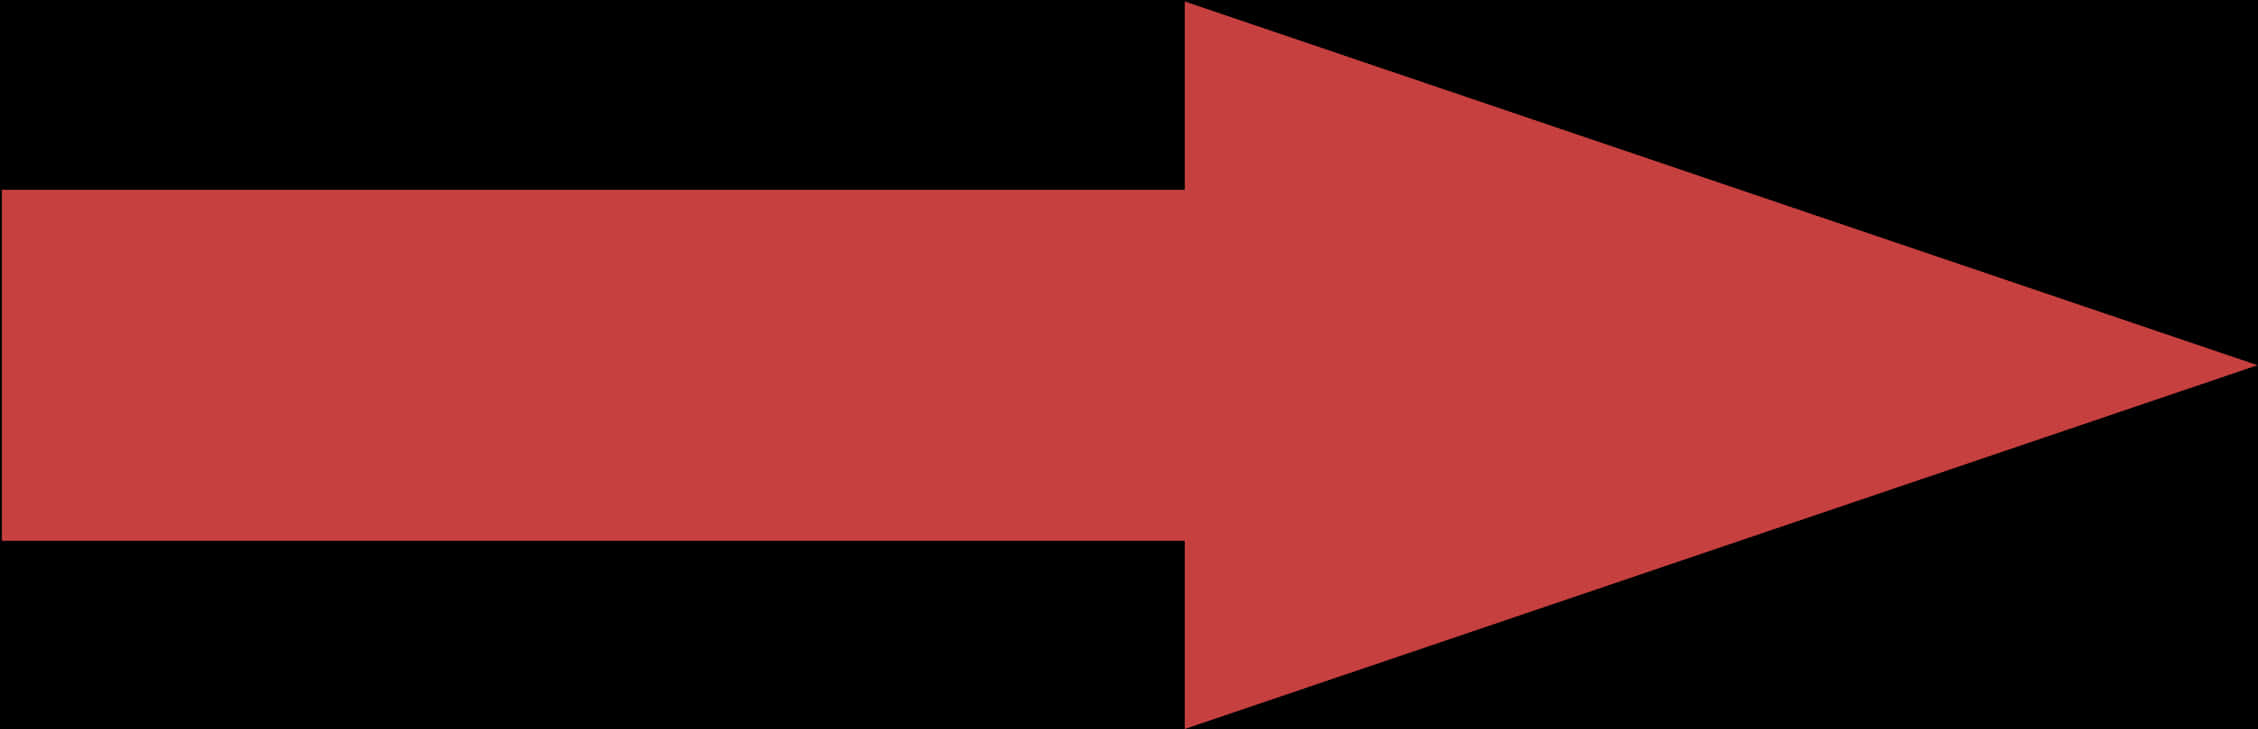 Red Arrow Graphic Directional Symbol